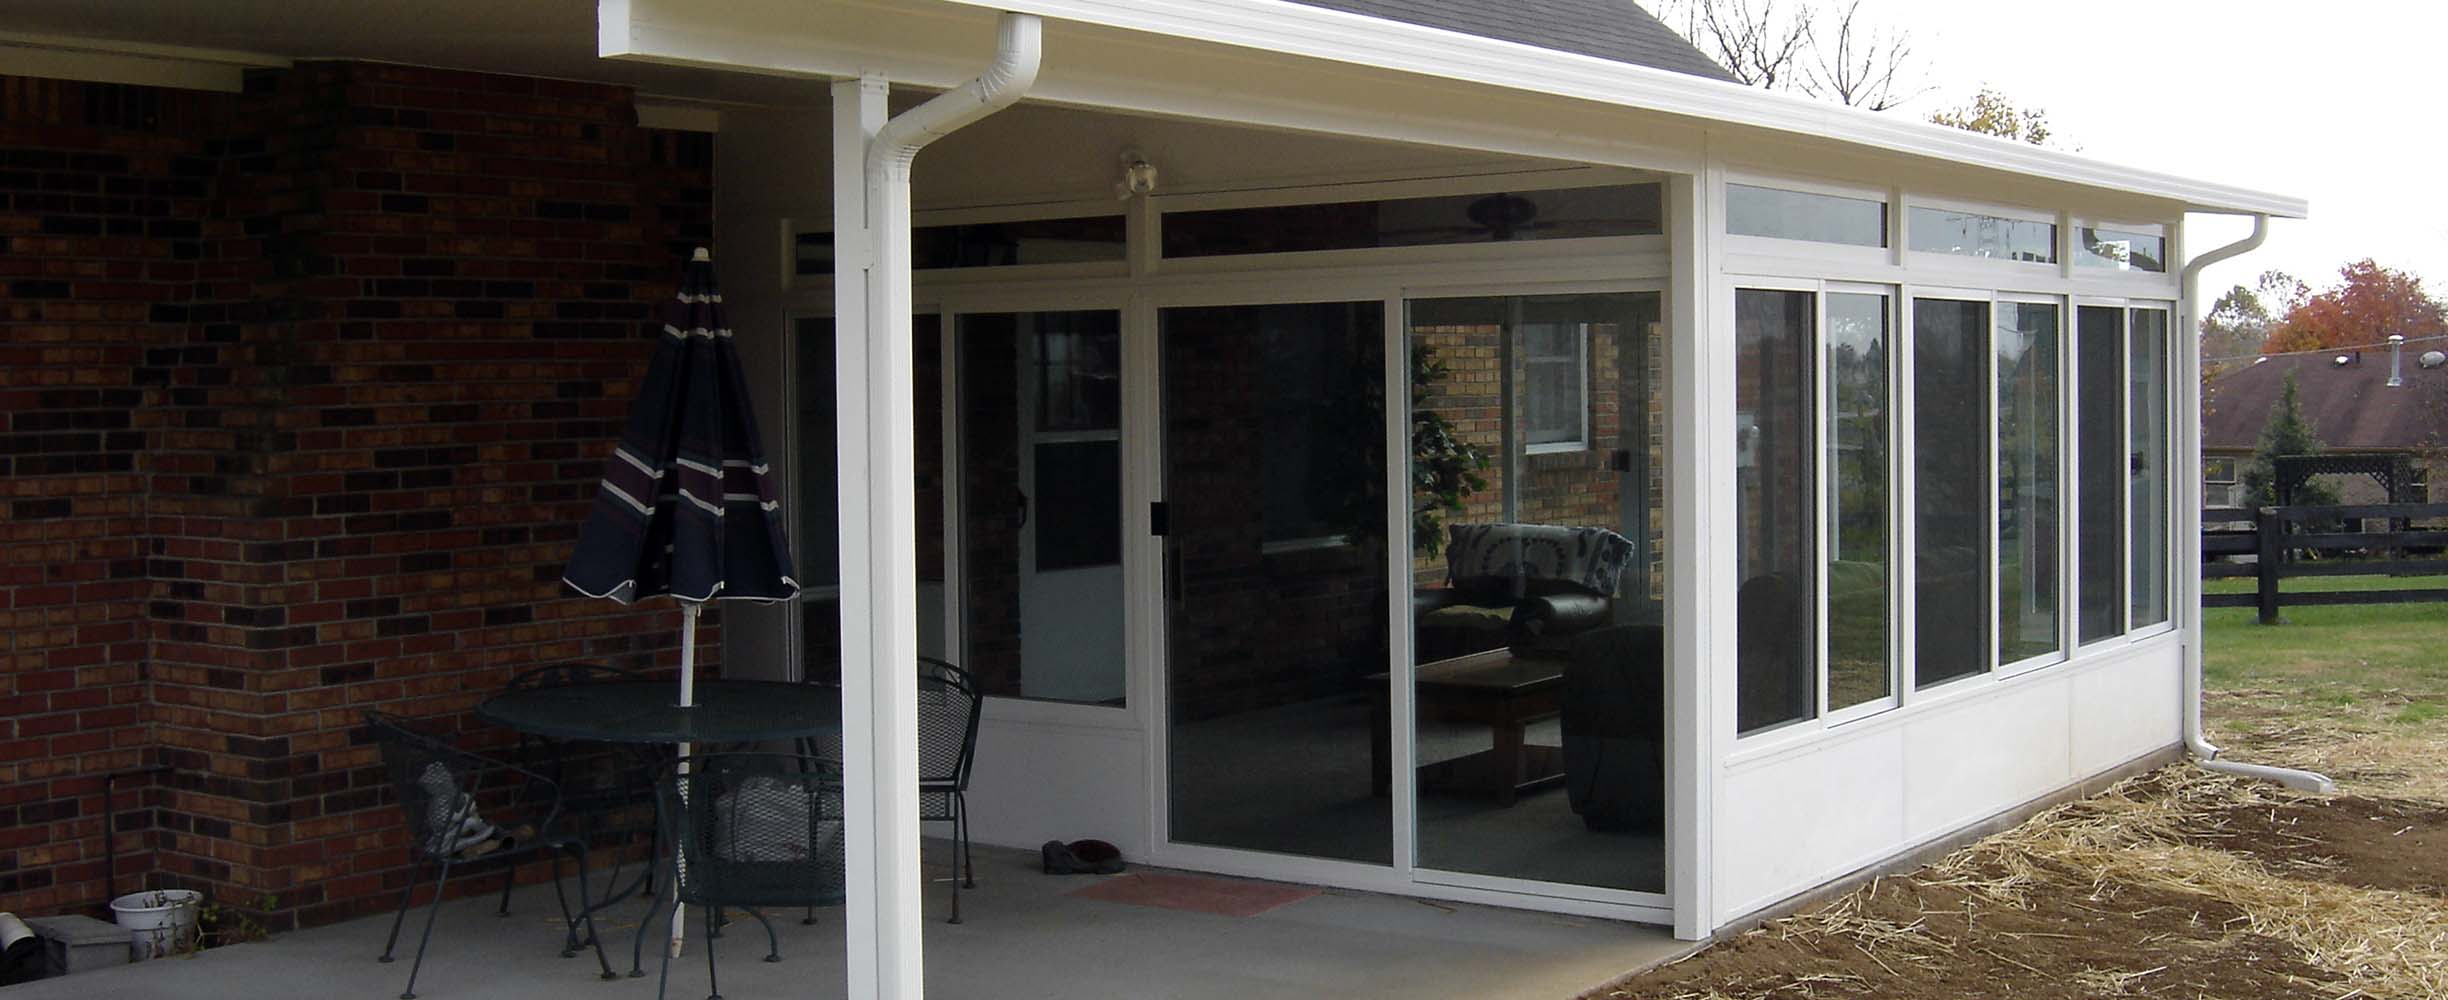 Patio covers can be mixed with patio sunrooms to make really practical house extensions within a reasonably low budget